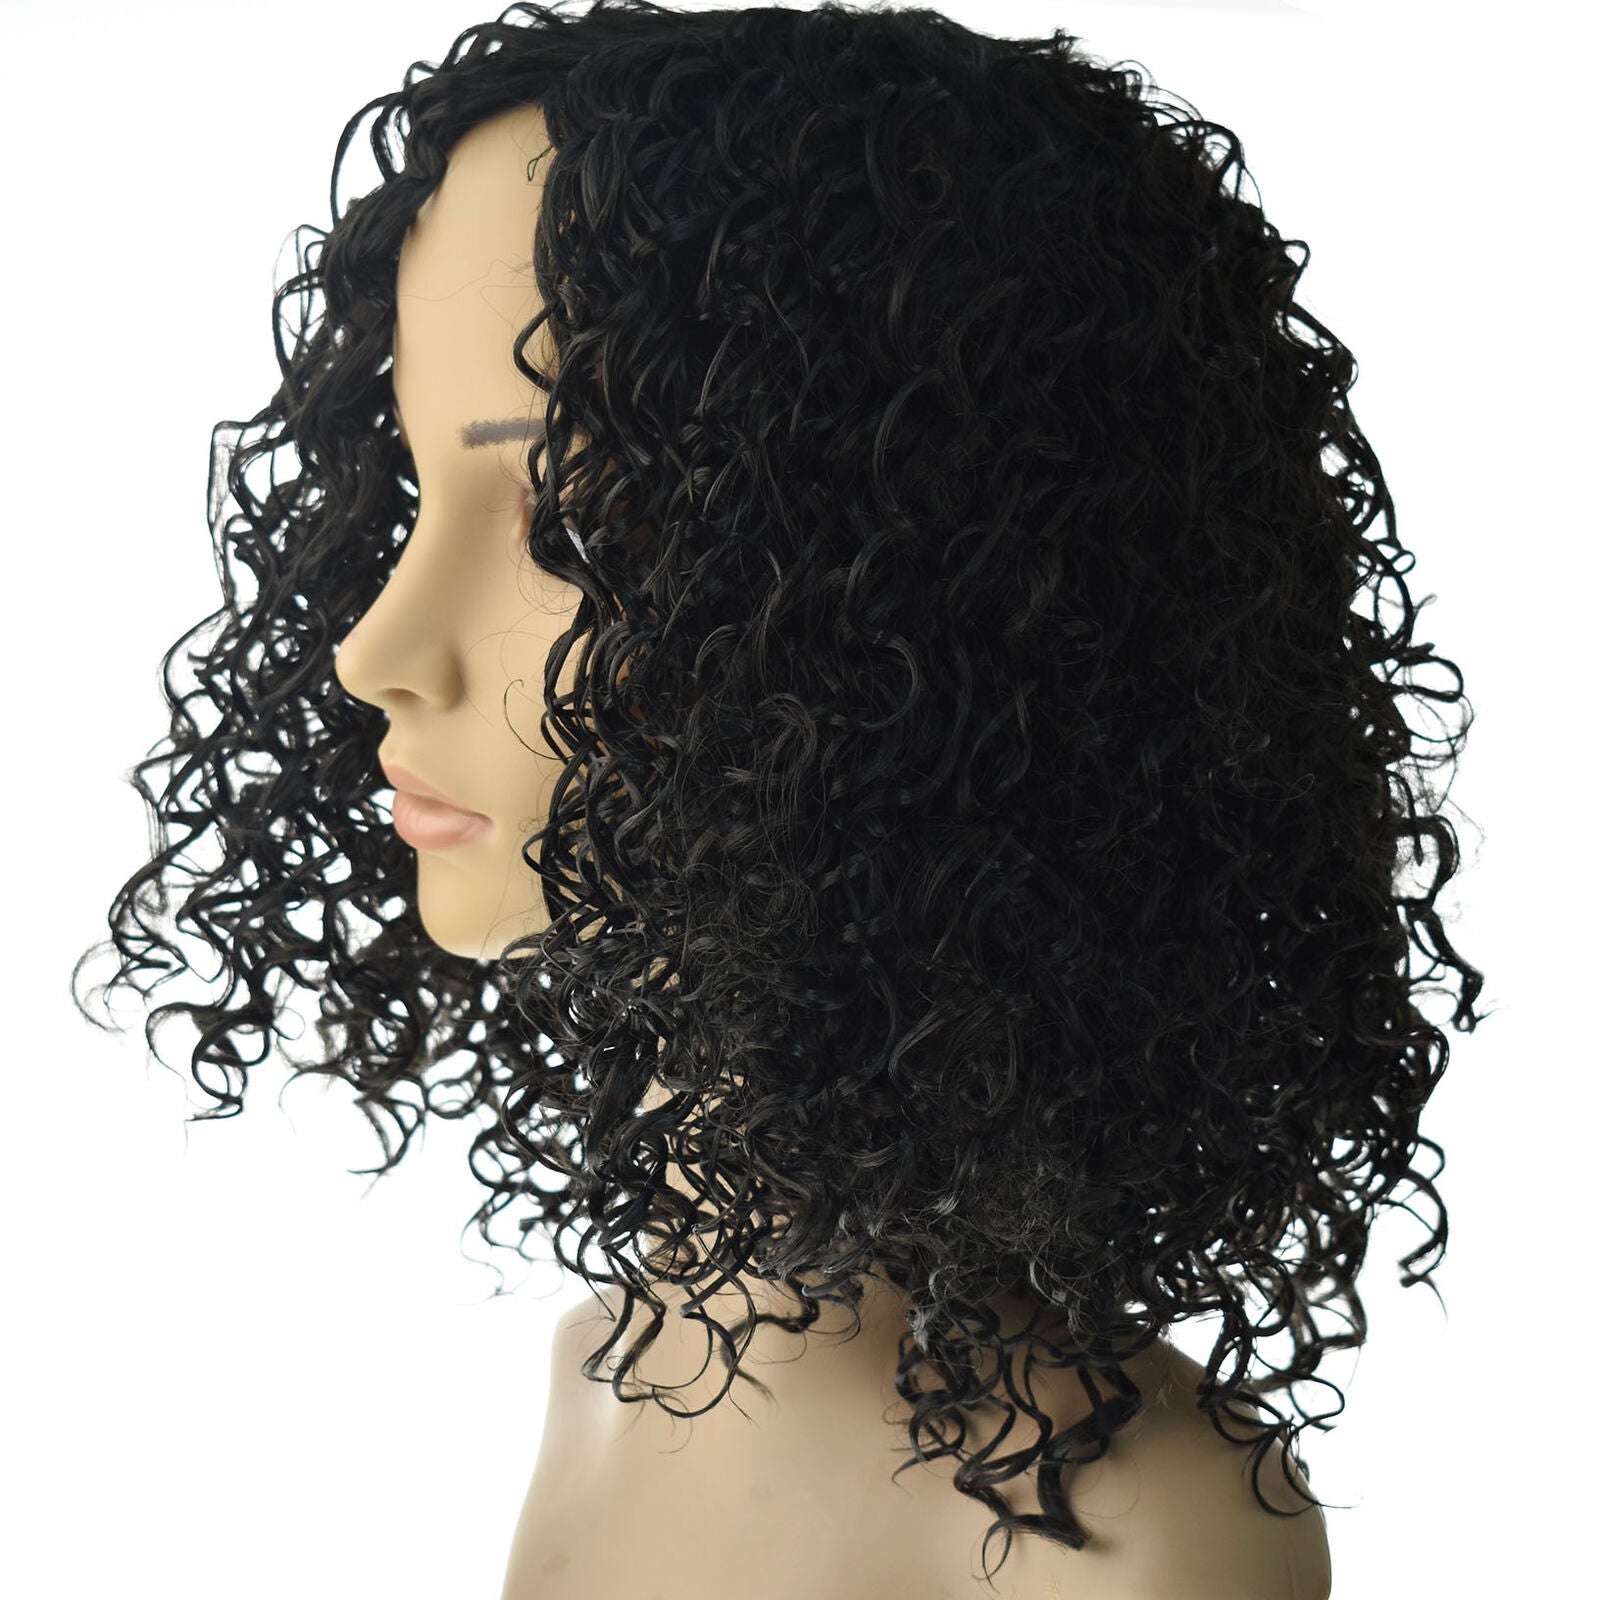 Women Short Curly Wavy Black Wig Ladies Costume Synthetic Hair